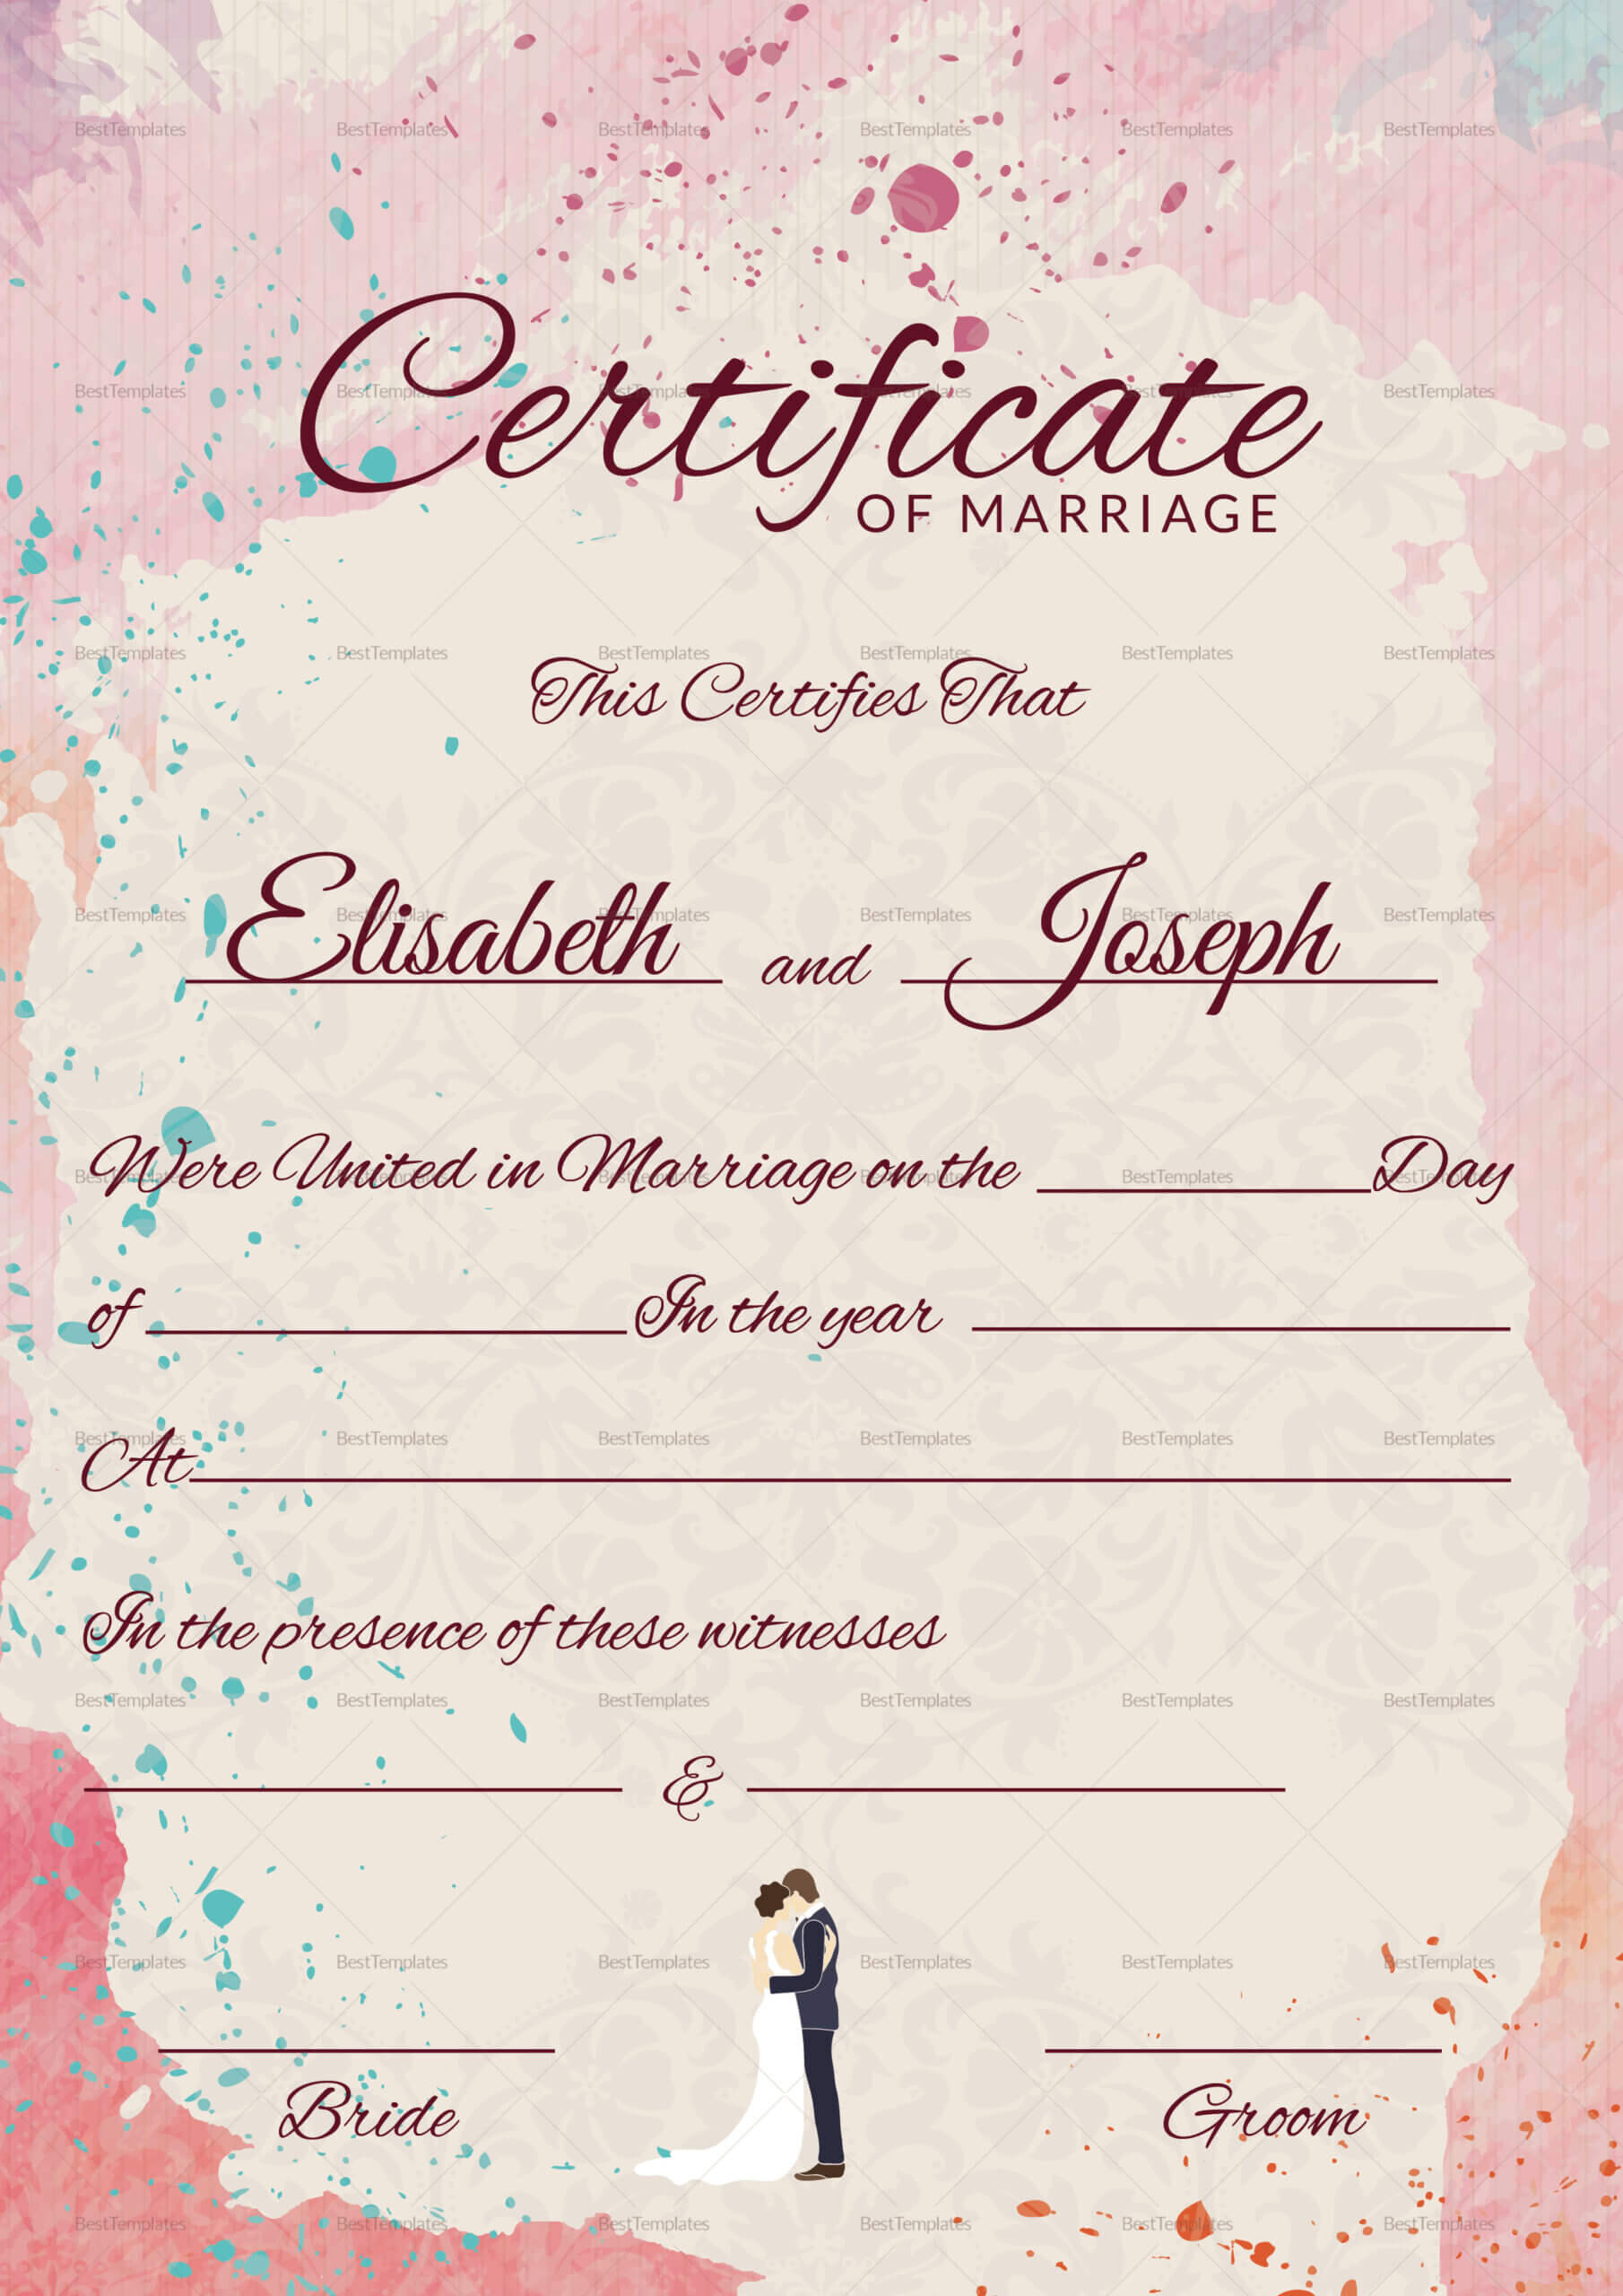 Christian Marriage Certificate Template Inside Certificate Of Marriage Template